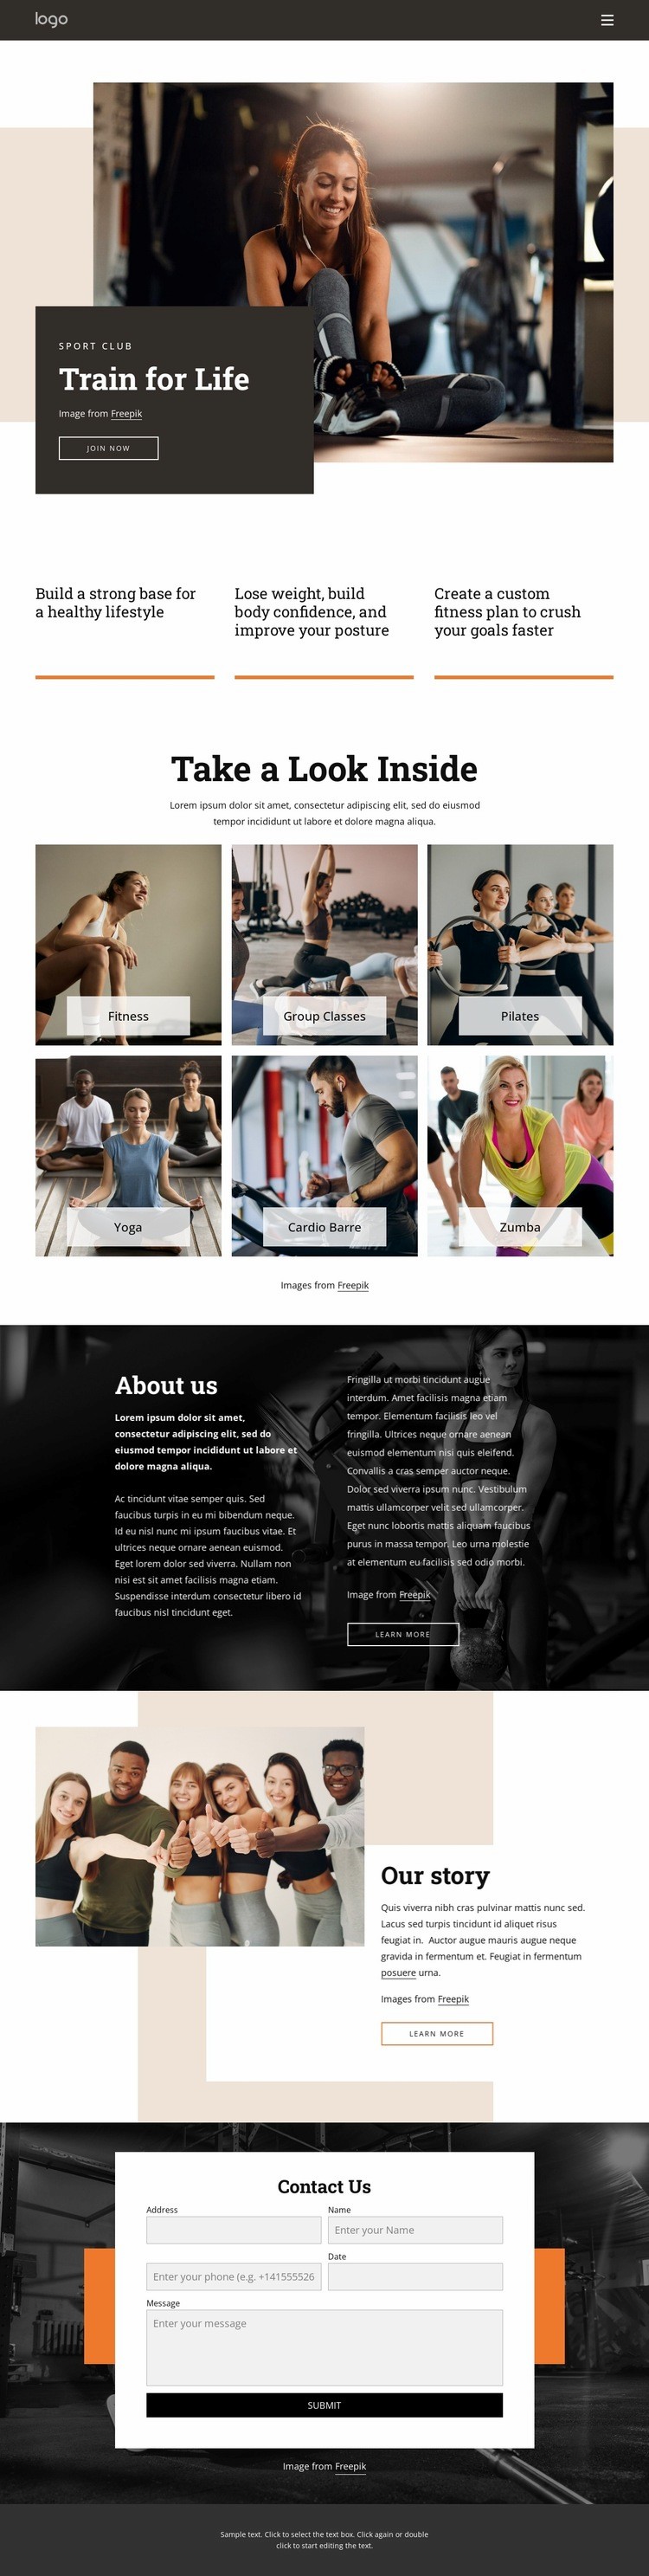 Get moving with our range of classes Web Page Design